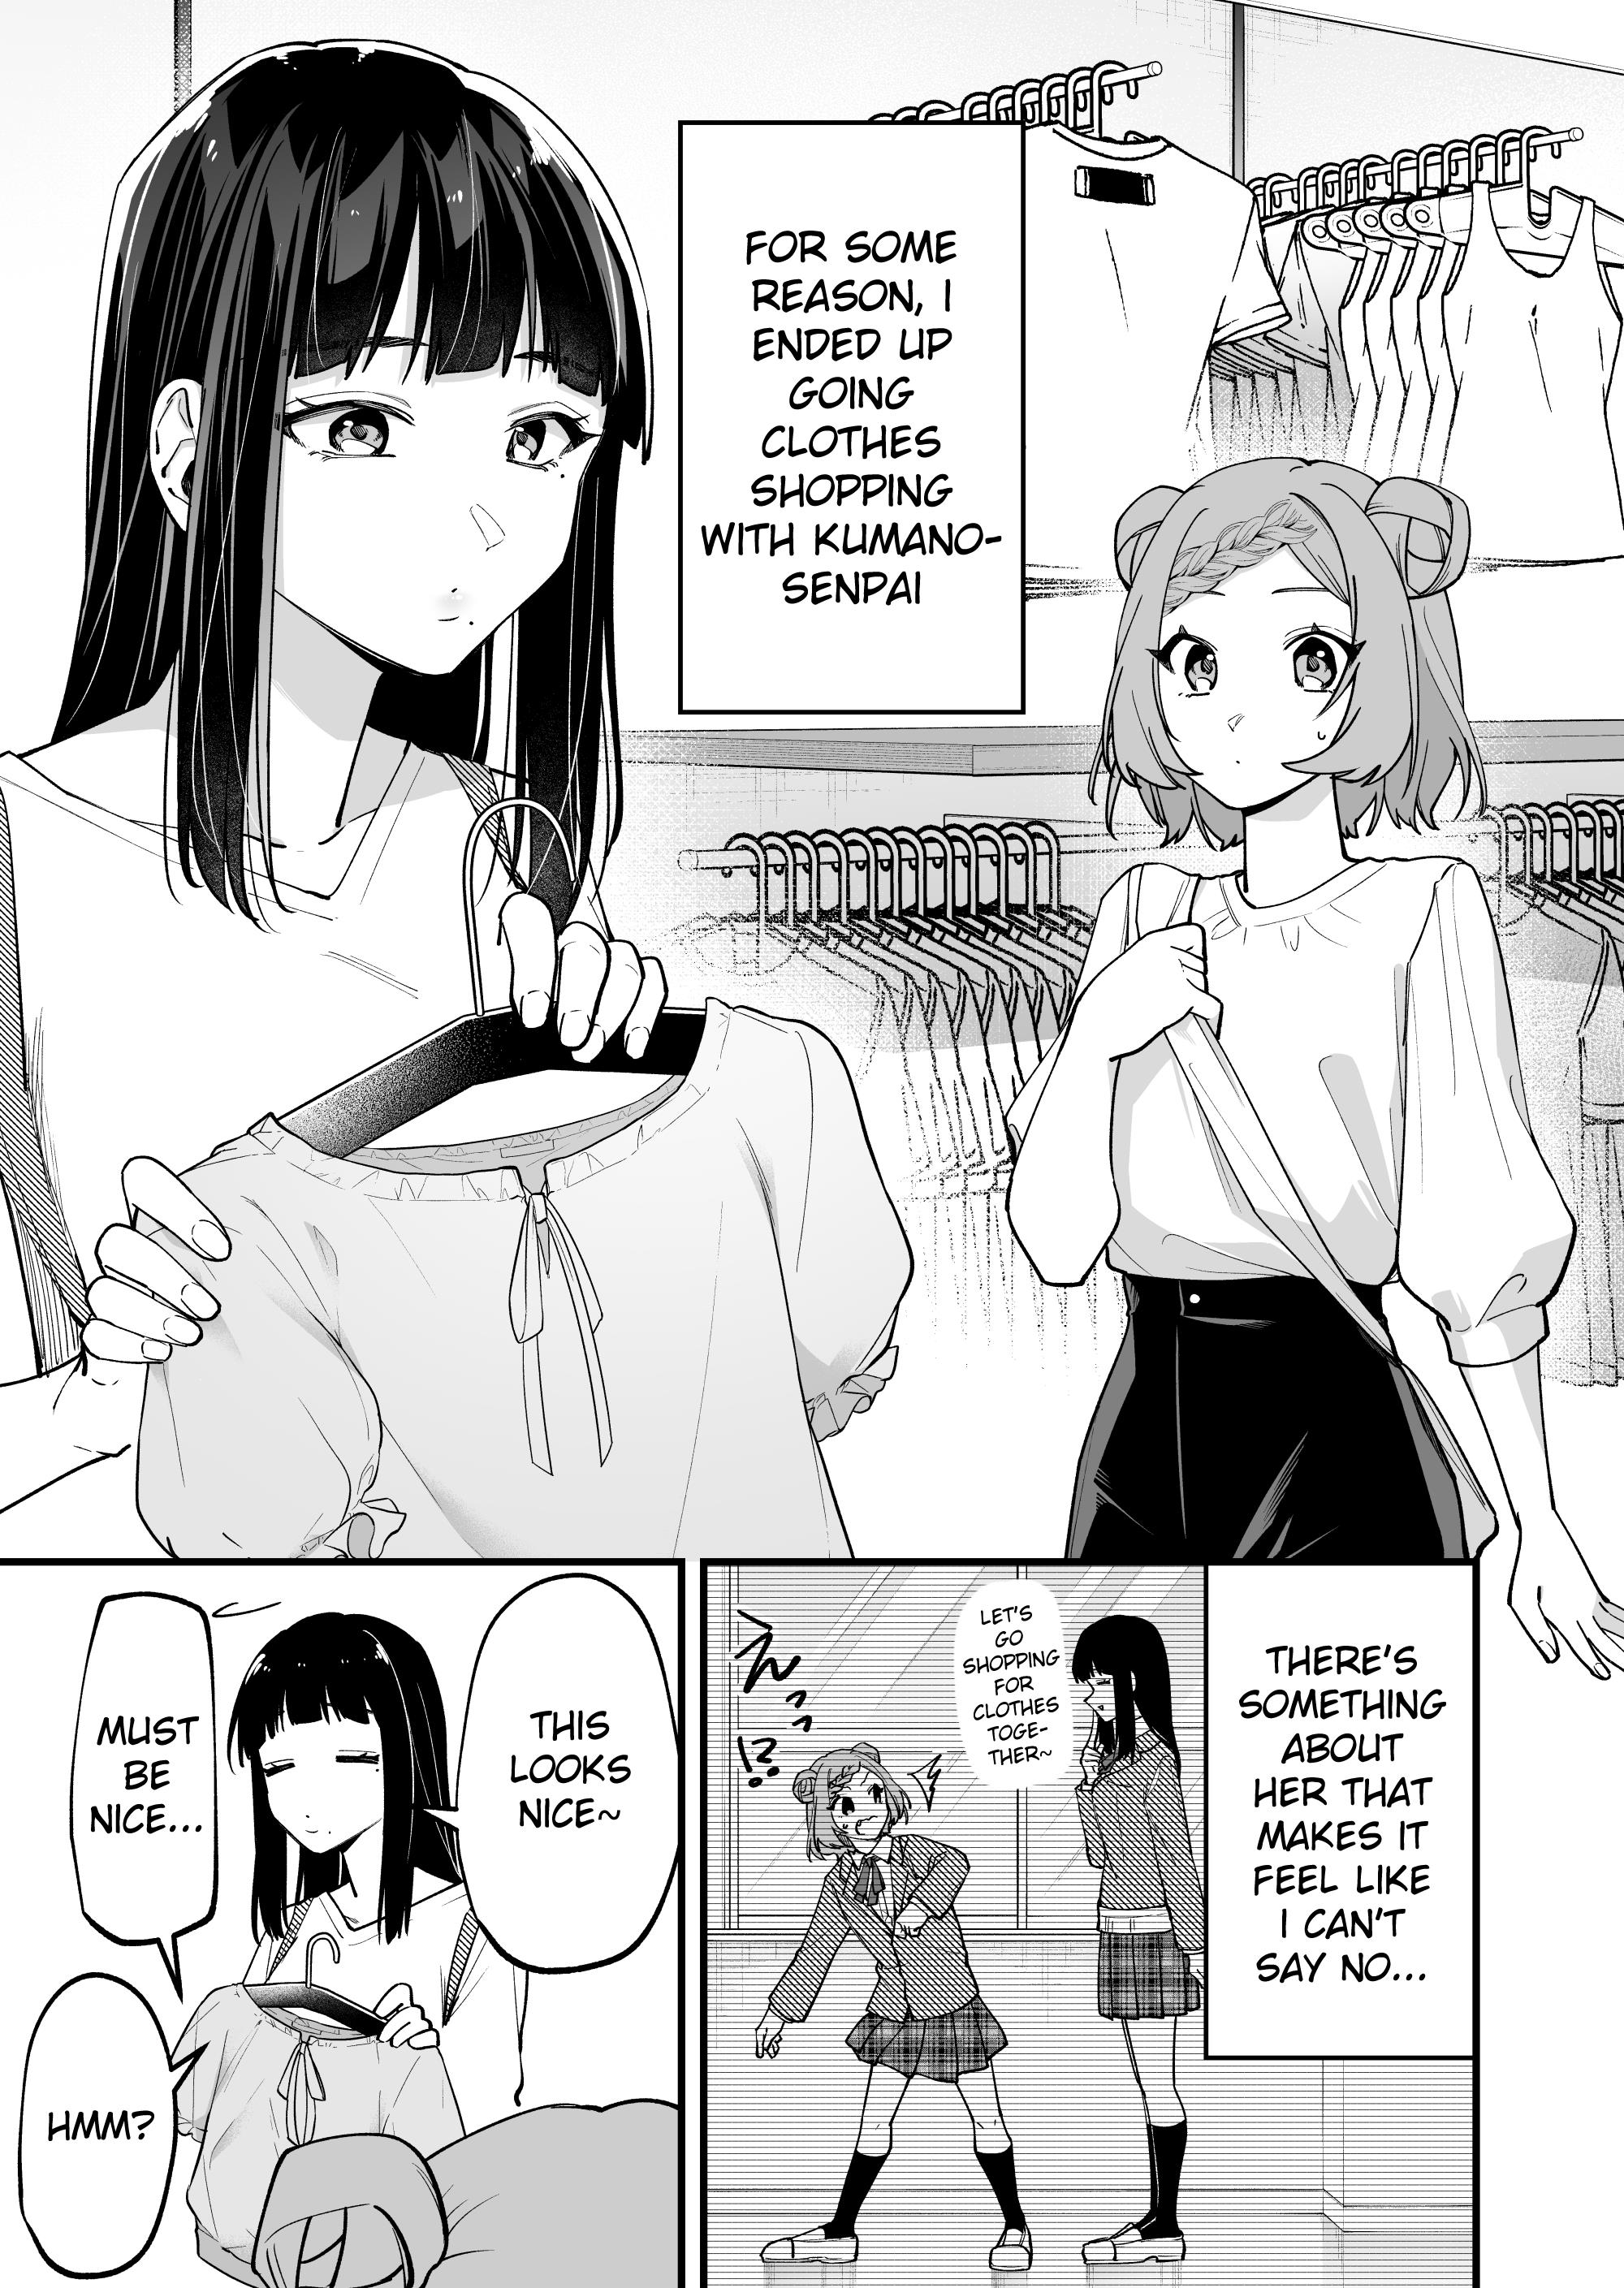 The Manager And The Oblivious Waitress Chapter 17: The Jk & Clothes Shopping - Picture 1